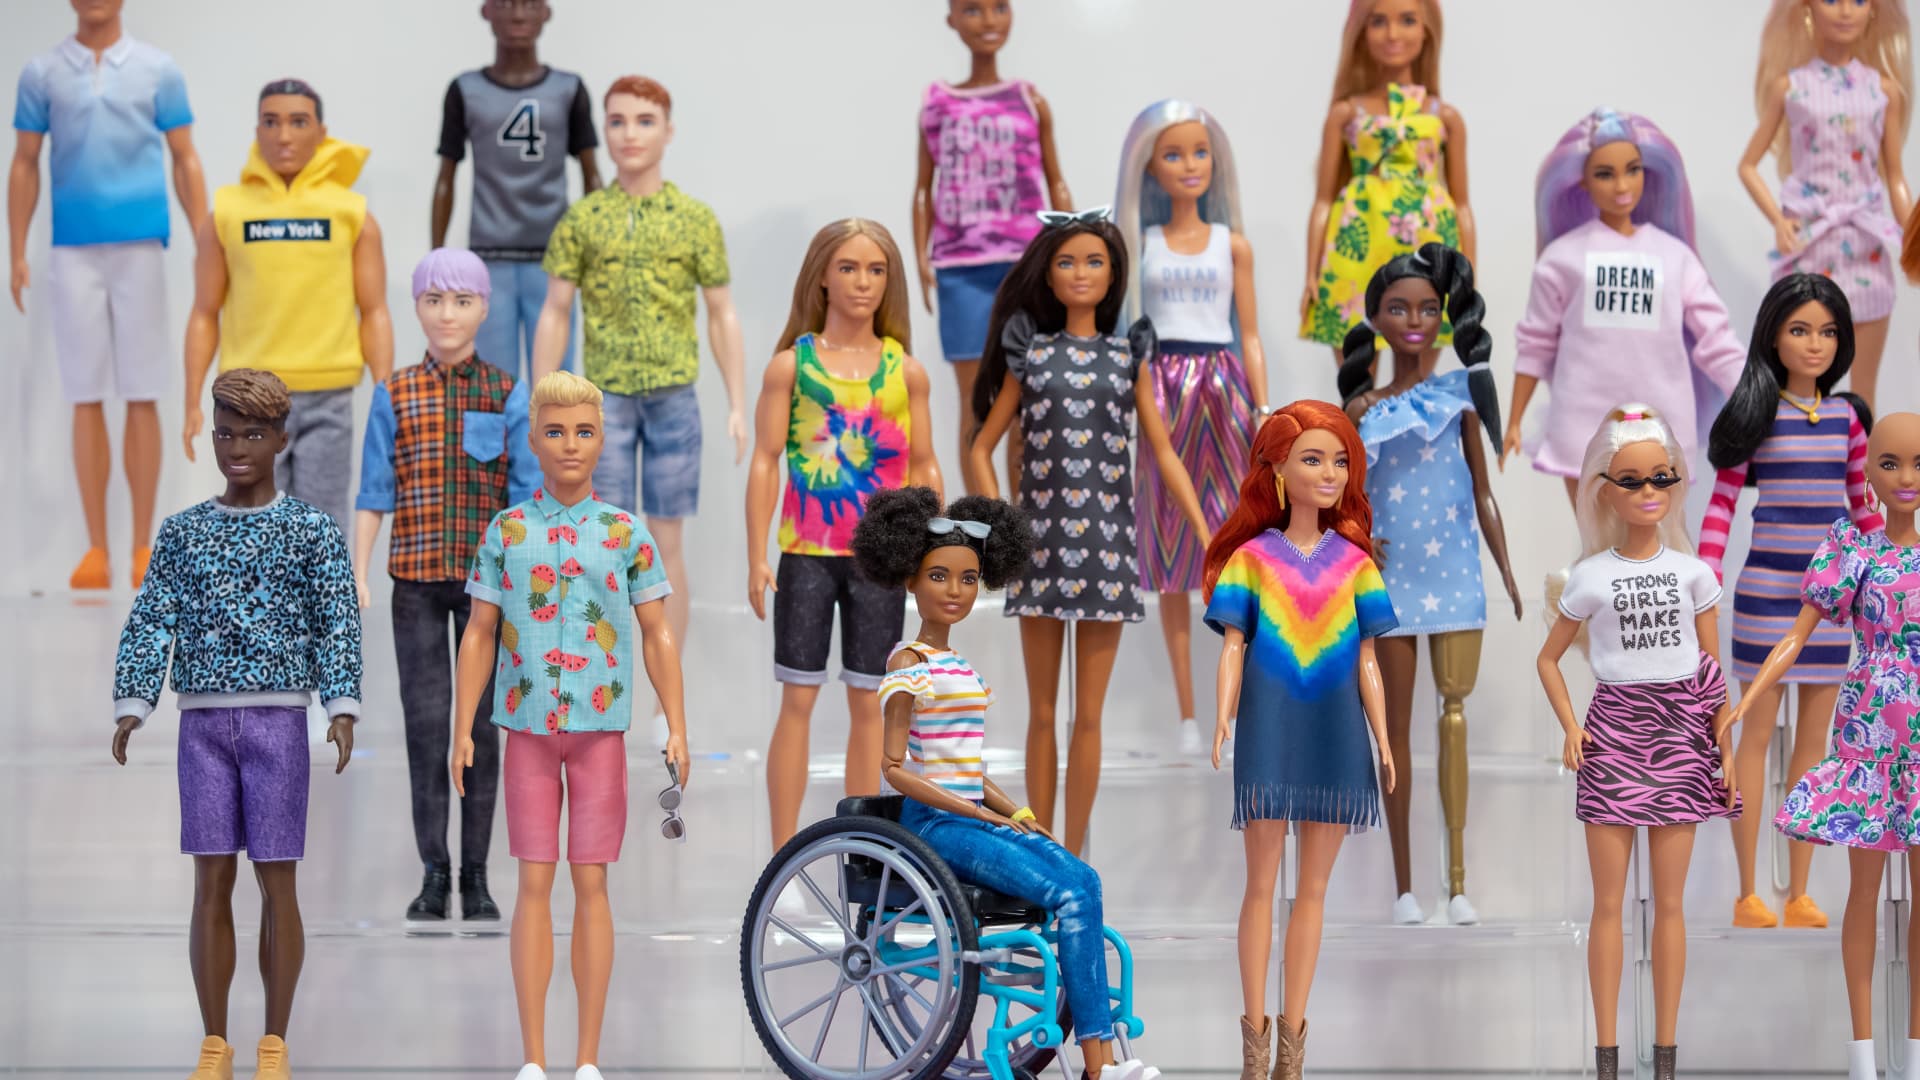 How the controversial Barbie brand made a comeback